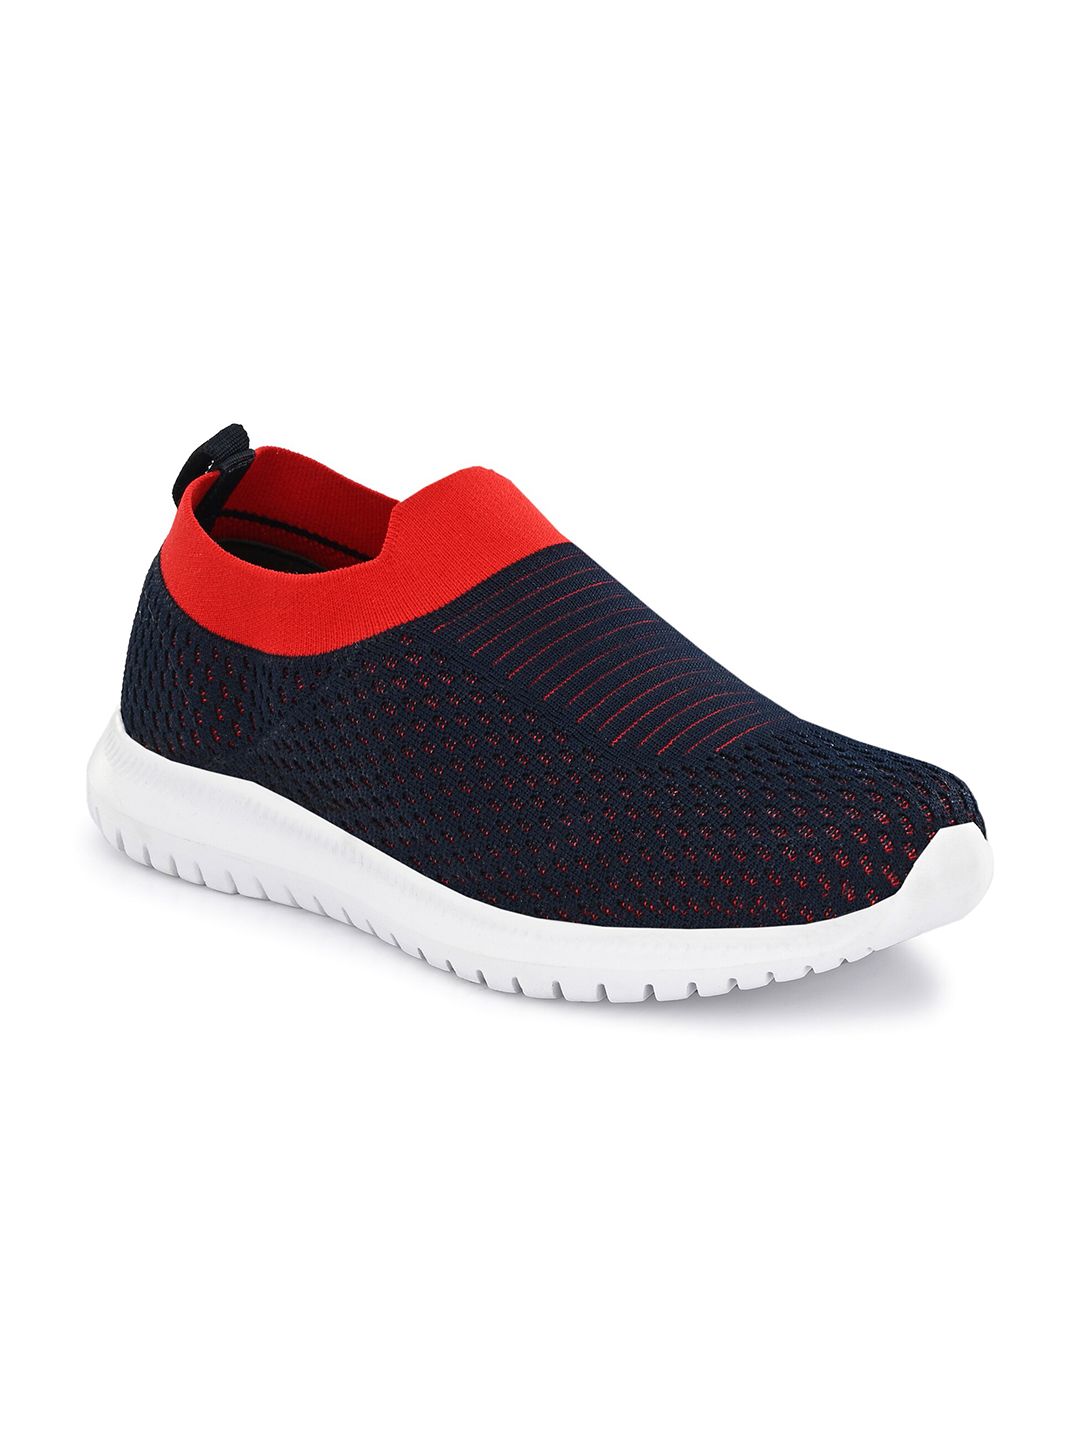 OFF LIMITS Women Navy Blue Mesh Walking Non-Marking Shoes Price in India